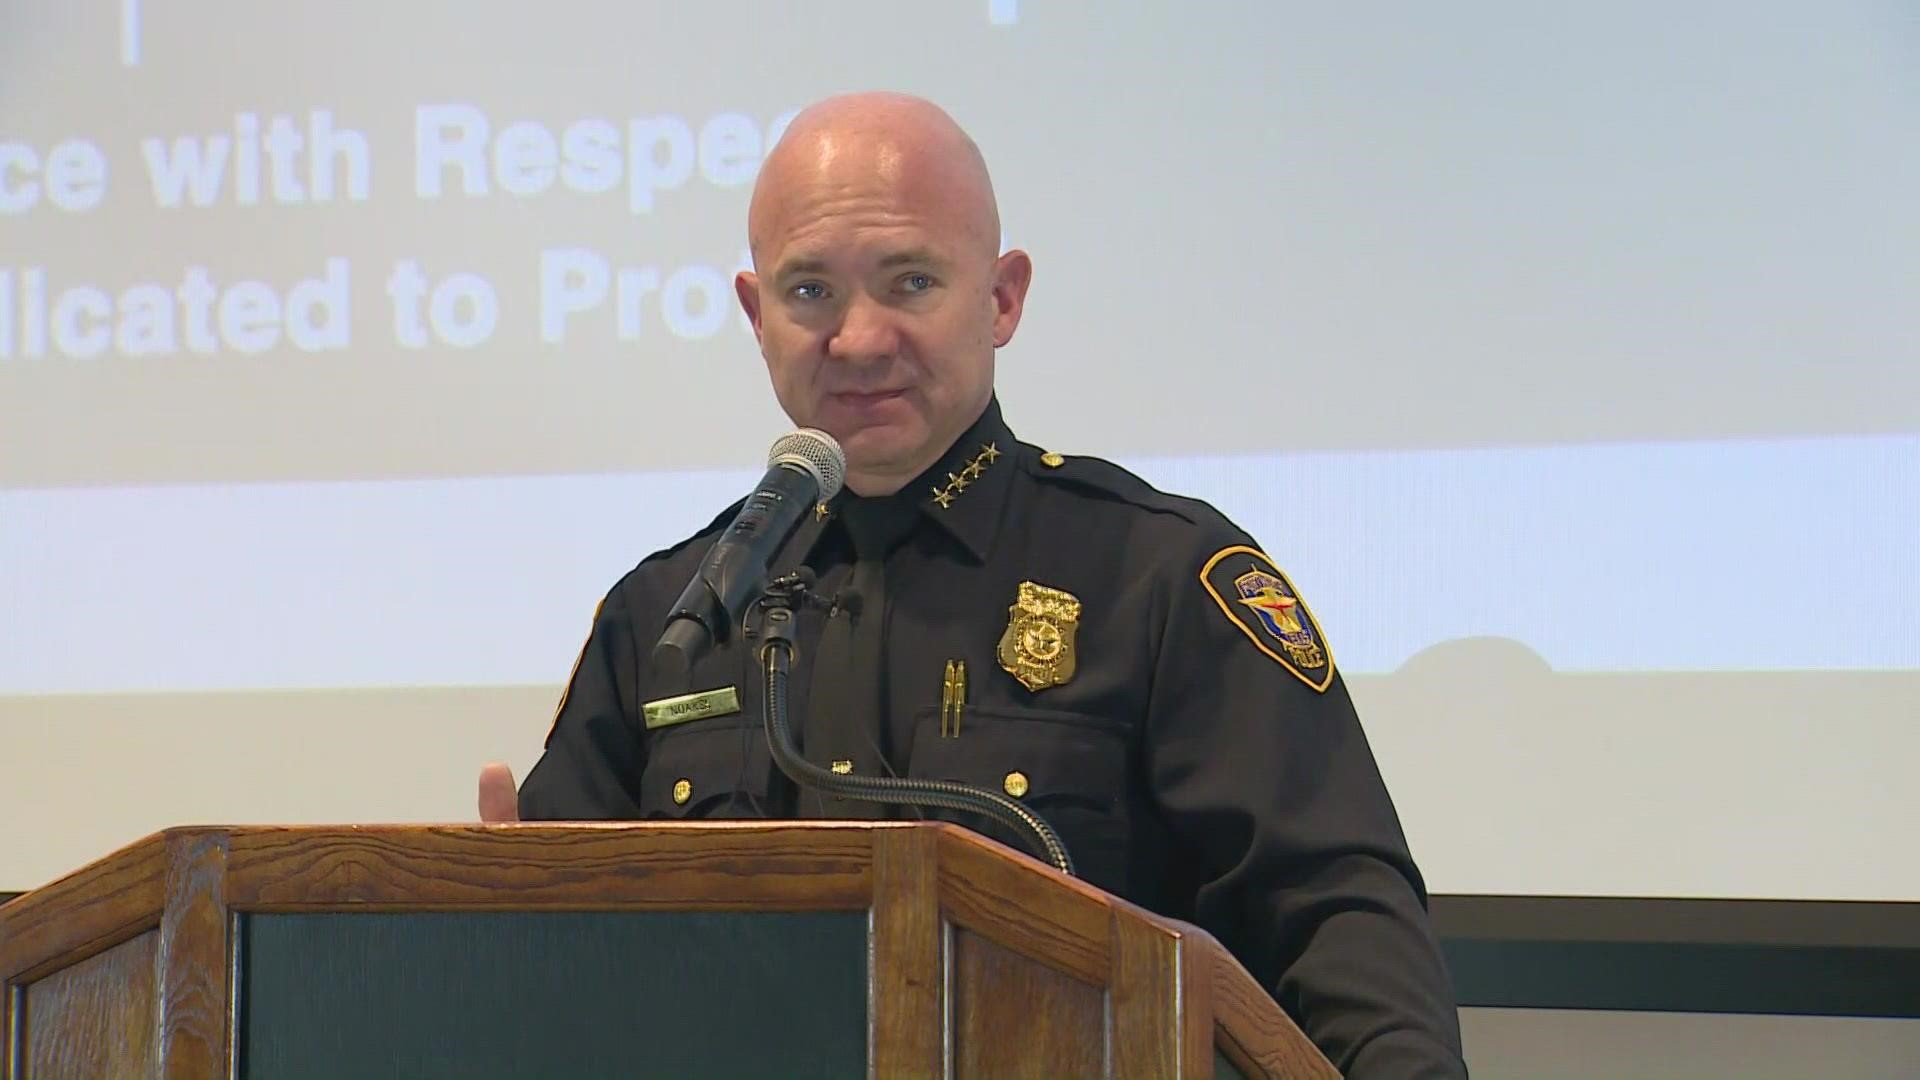 Fort Worth Police Chief Neil Noakes laid out his plan to reduce violent crime in Fort Worth by 10%.